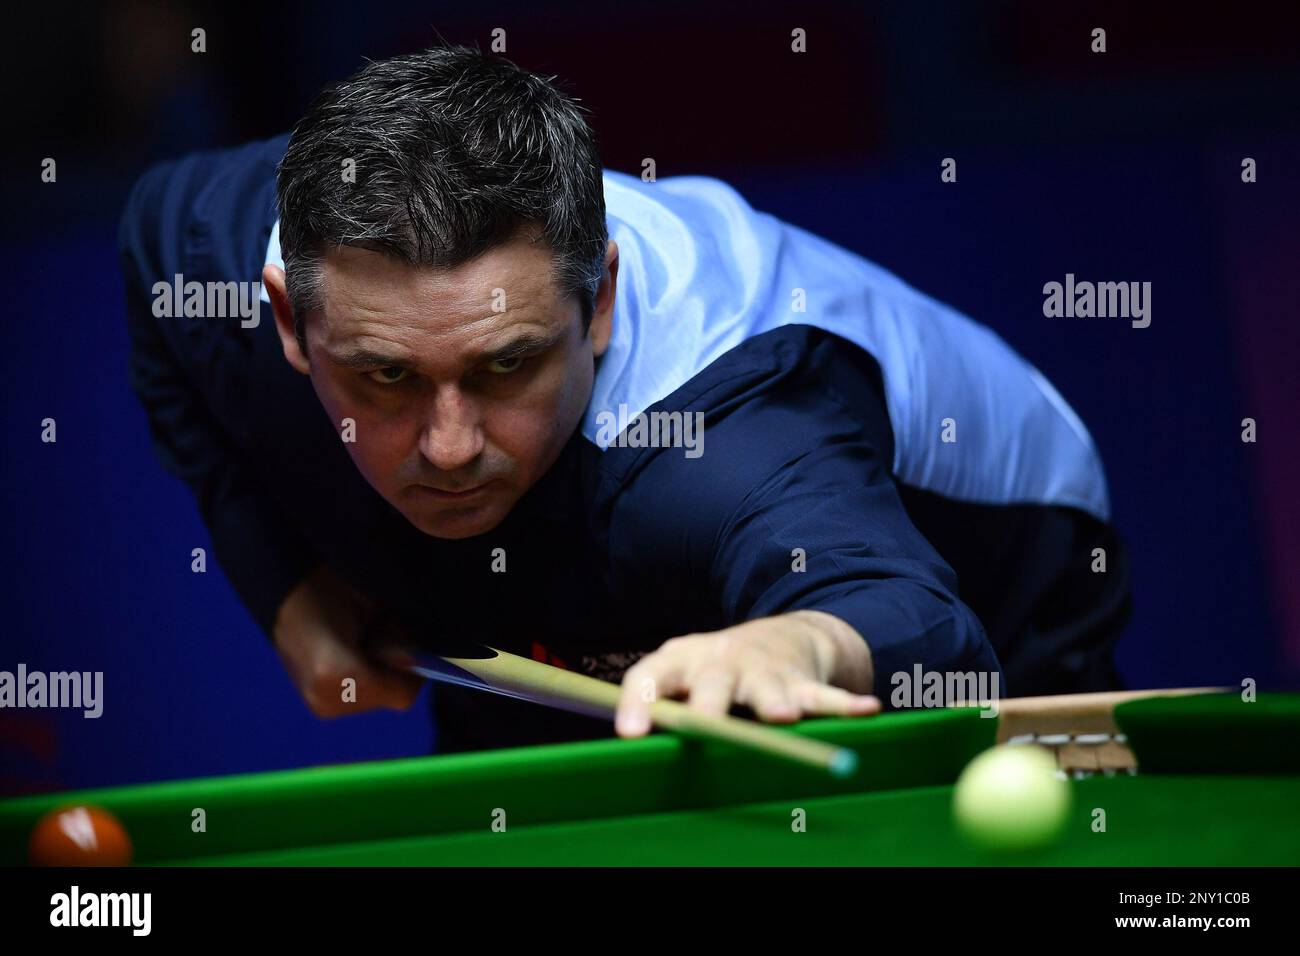 Alan McManus of Scotland plays a shot to Mark Selby of England in their second round match during the 2017 Shanghai Masters snooker tournament in Shanghai, China, 15 November 2017.Mark Selby defeated